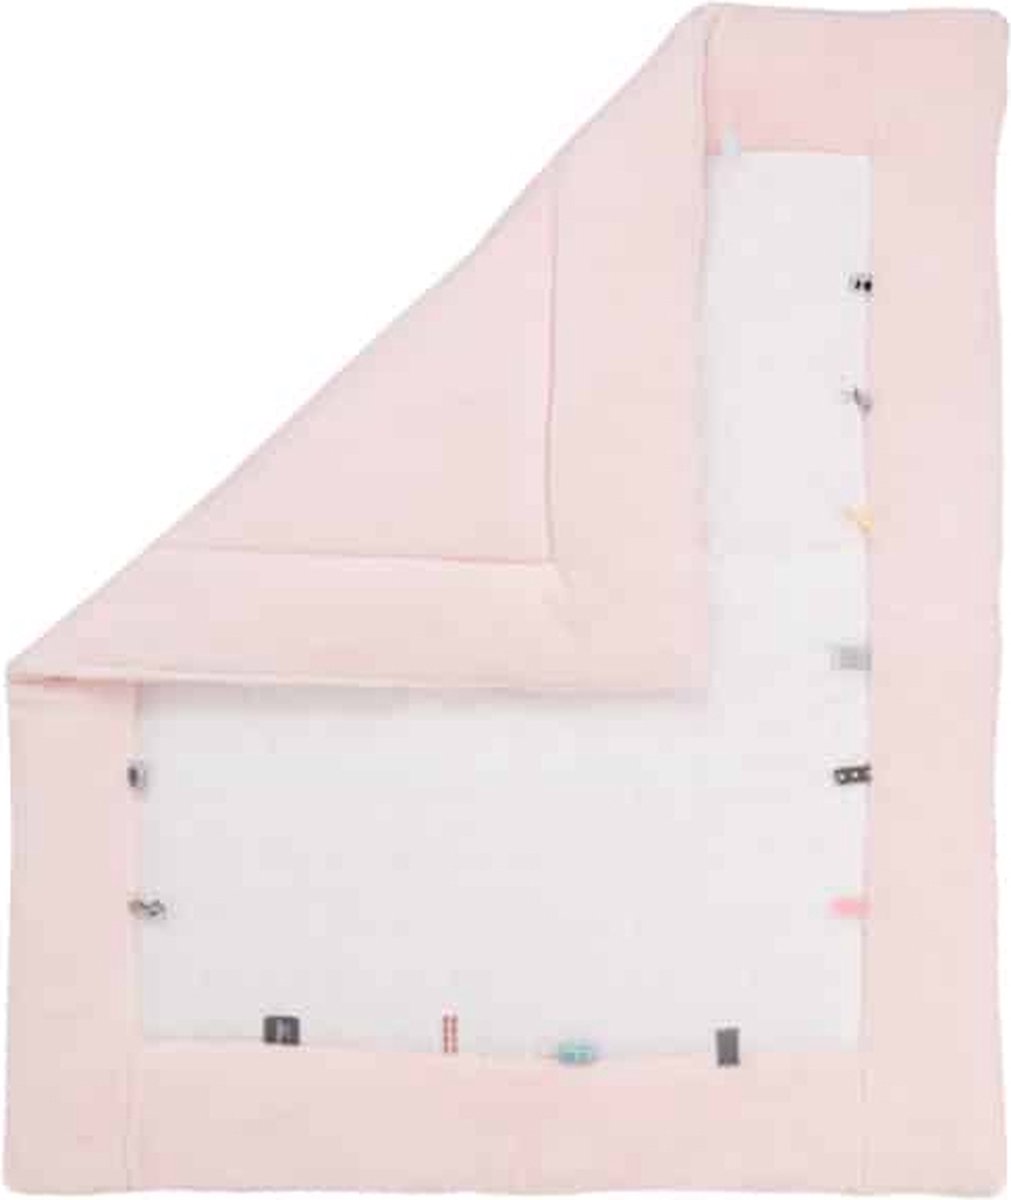 Snoozebaby Speelkleed Boxkleed Cheerful Playing - met labeltjes - 85x105 cm - Orchid Blush roze